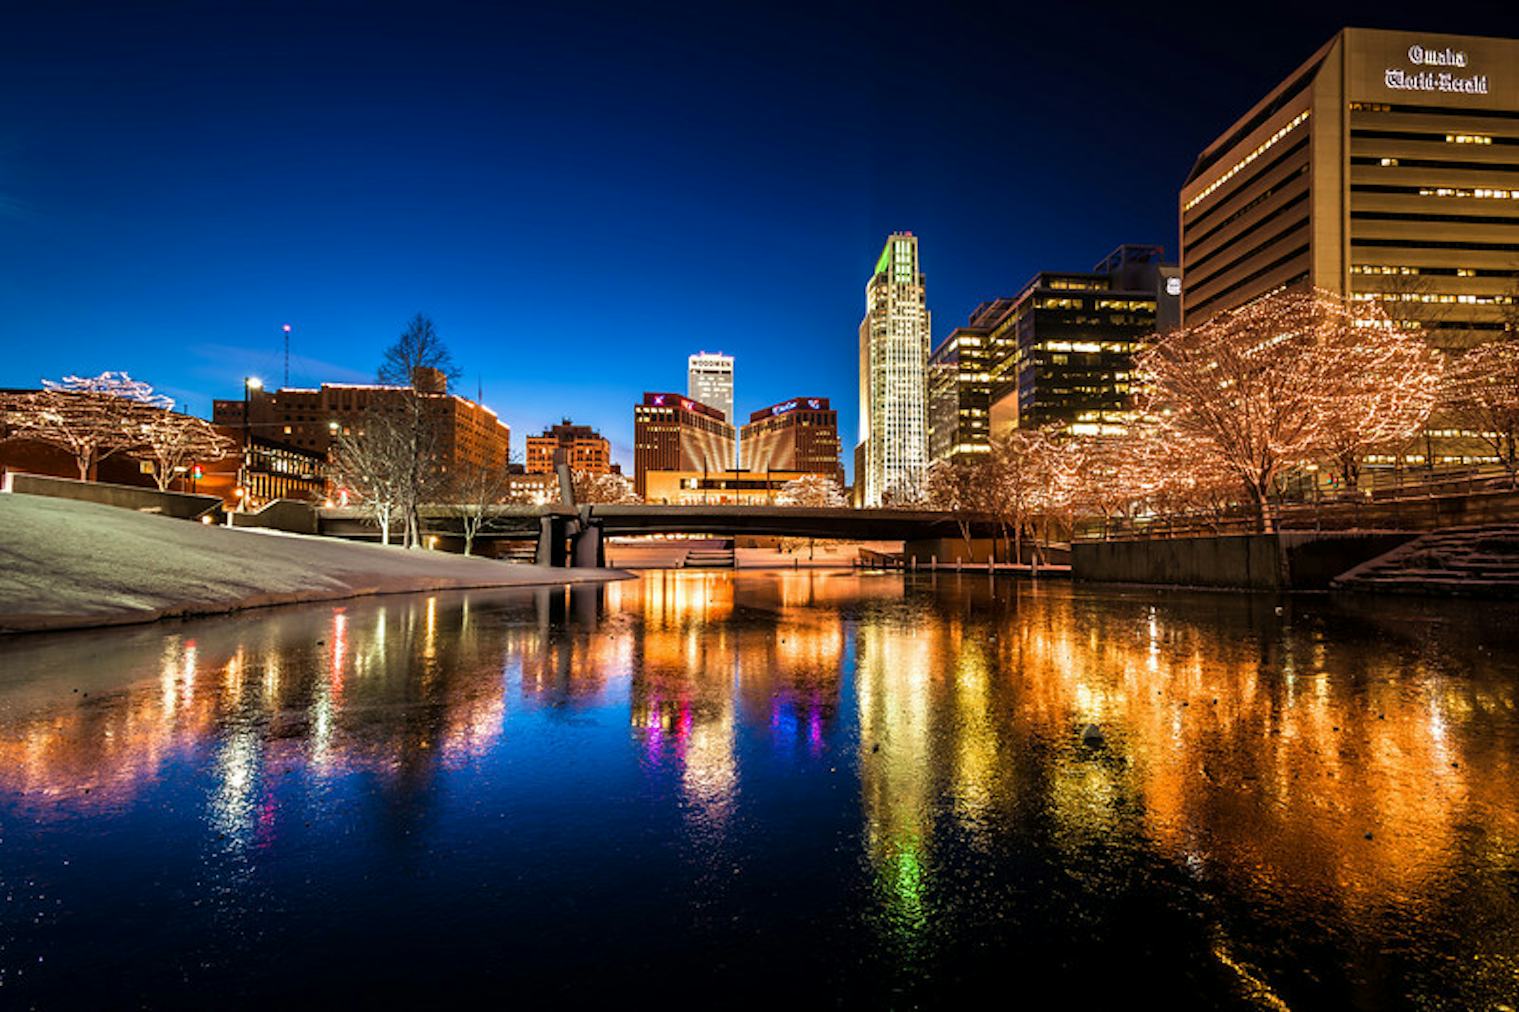 15 Things You Probably Didn't Know About Omaha, Nebraska, Because No